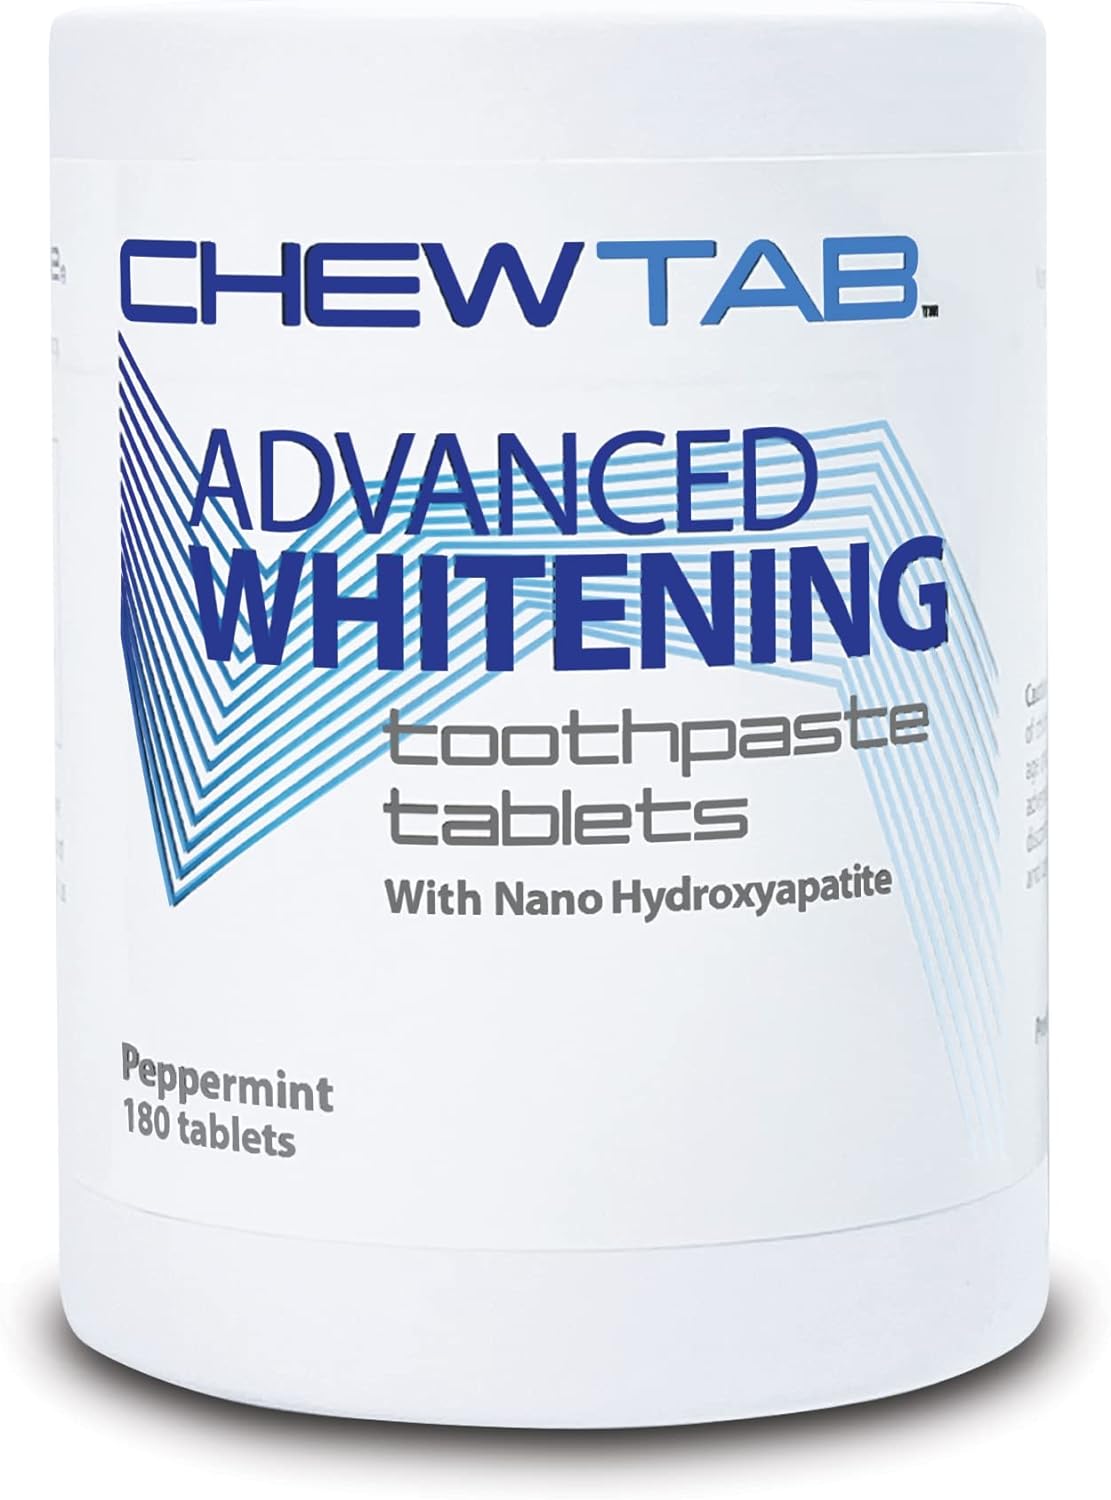 Chewtab Advanced Whitening Toothpaste Tablets with Nano-Hydroxyapatite 180 Count Refill (Peppermint)